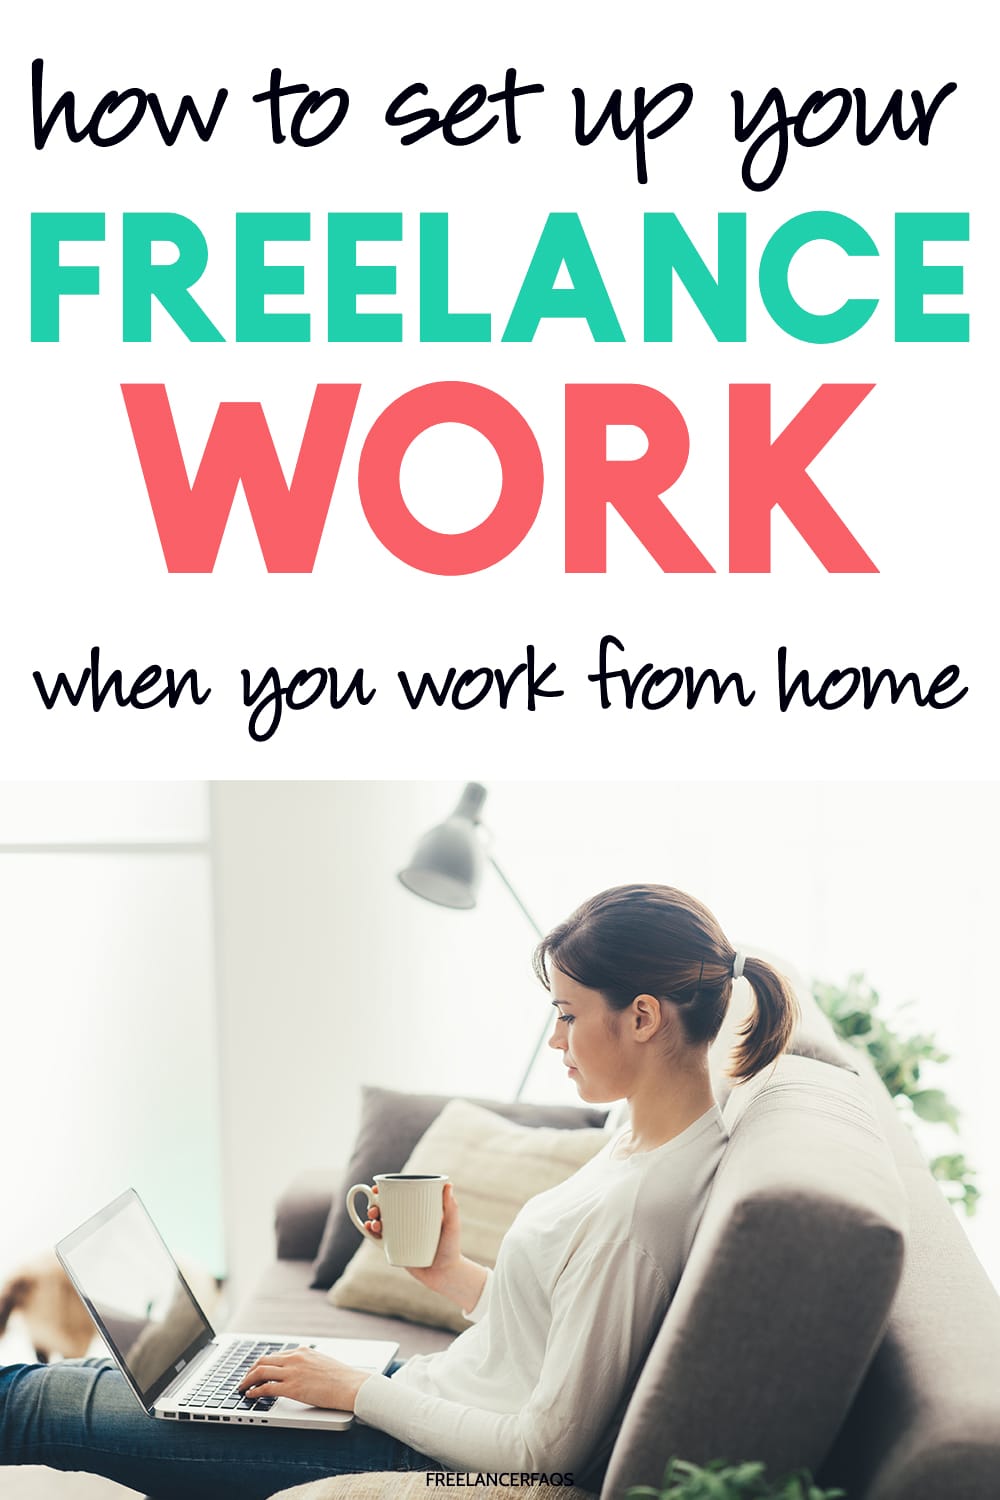 How Do I Set Up My Business For My Freelance Work from Home